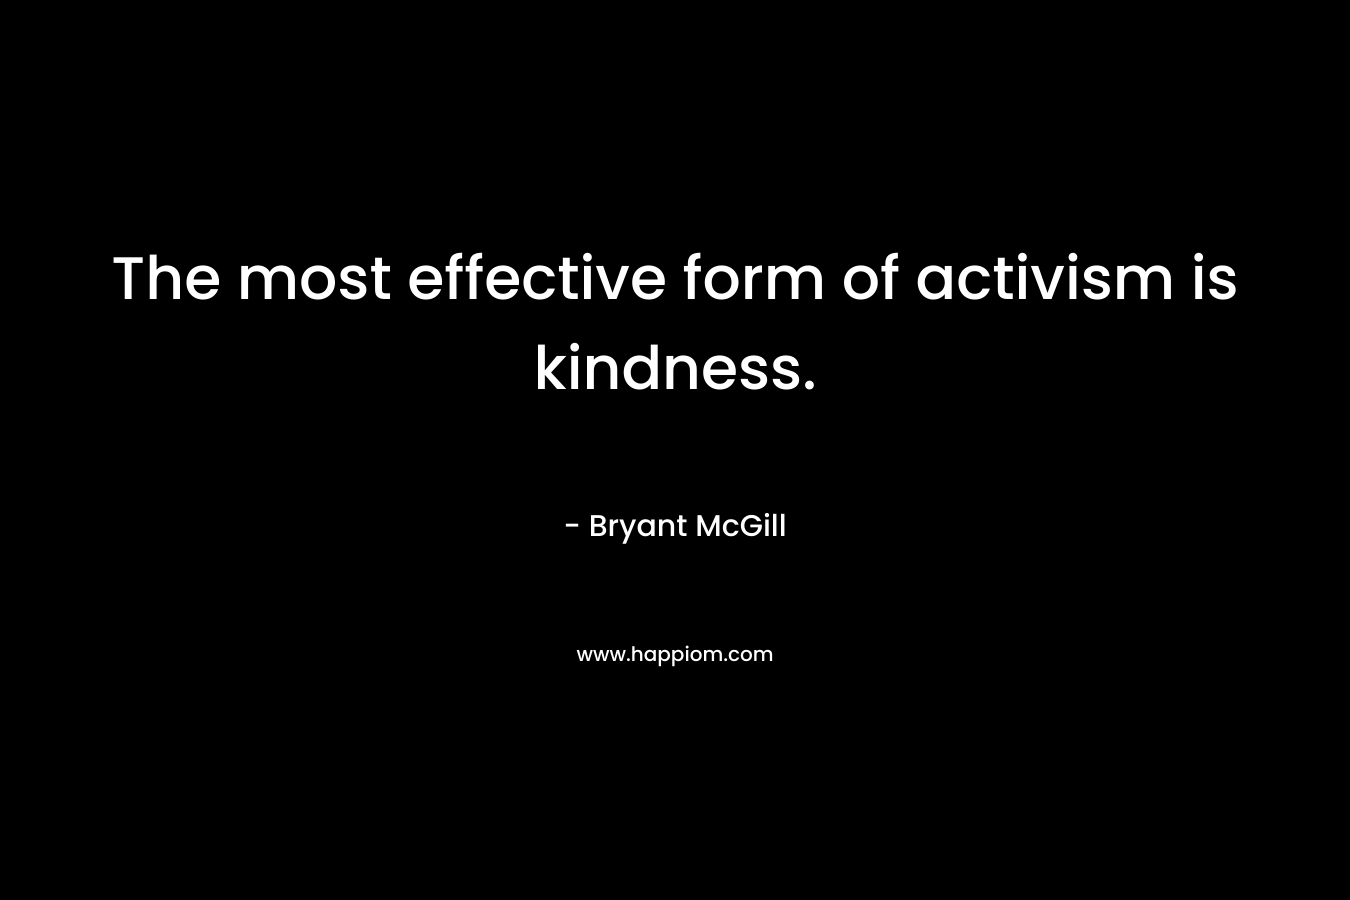 The most effective form of activism is kindness. – Bryant McGill